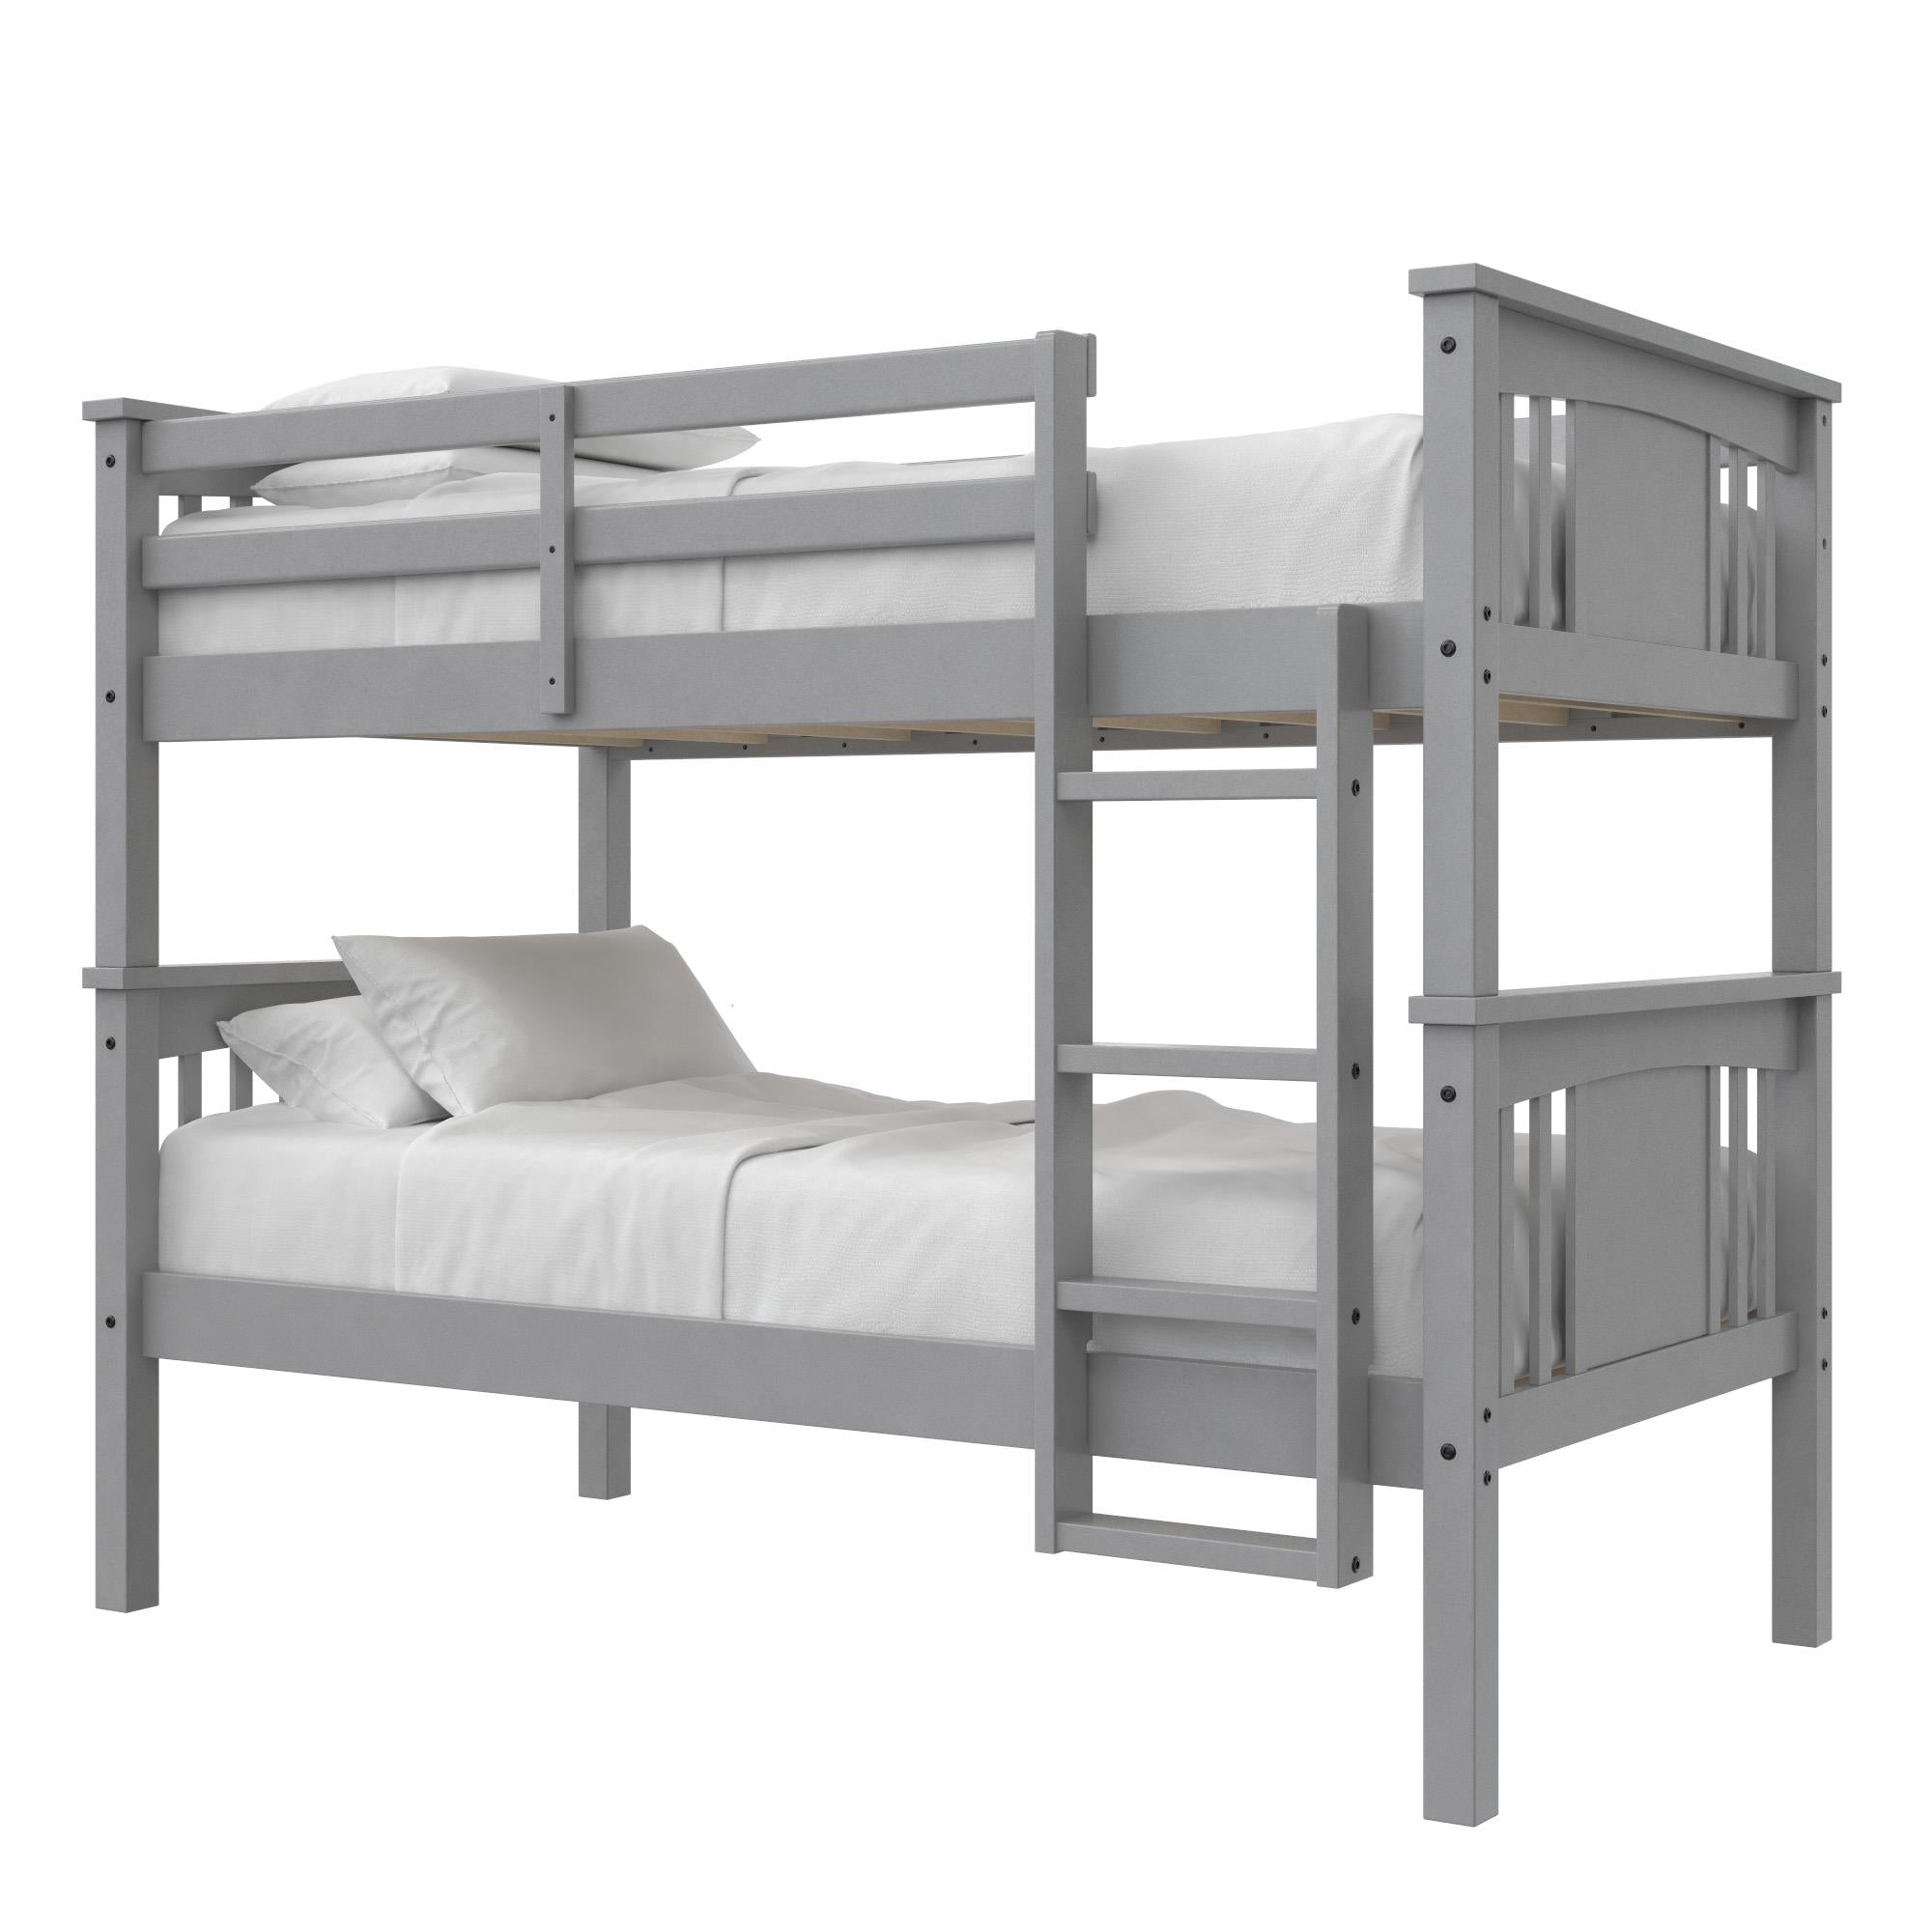 Better Homes and Gardens Flynn Twin Size Bunk Bed for Kids, Gray